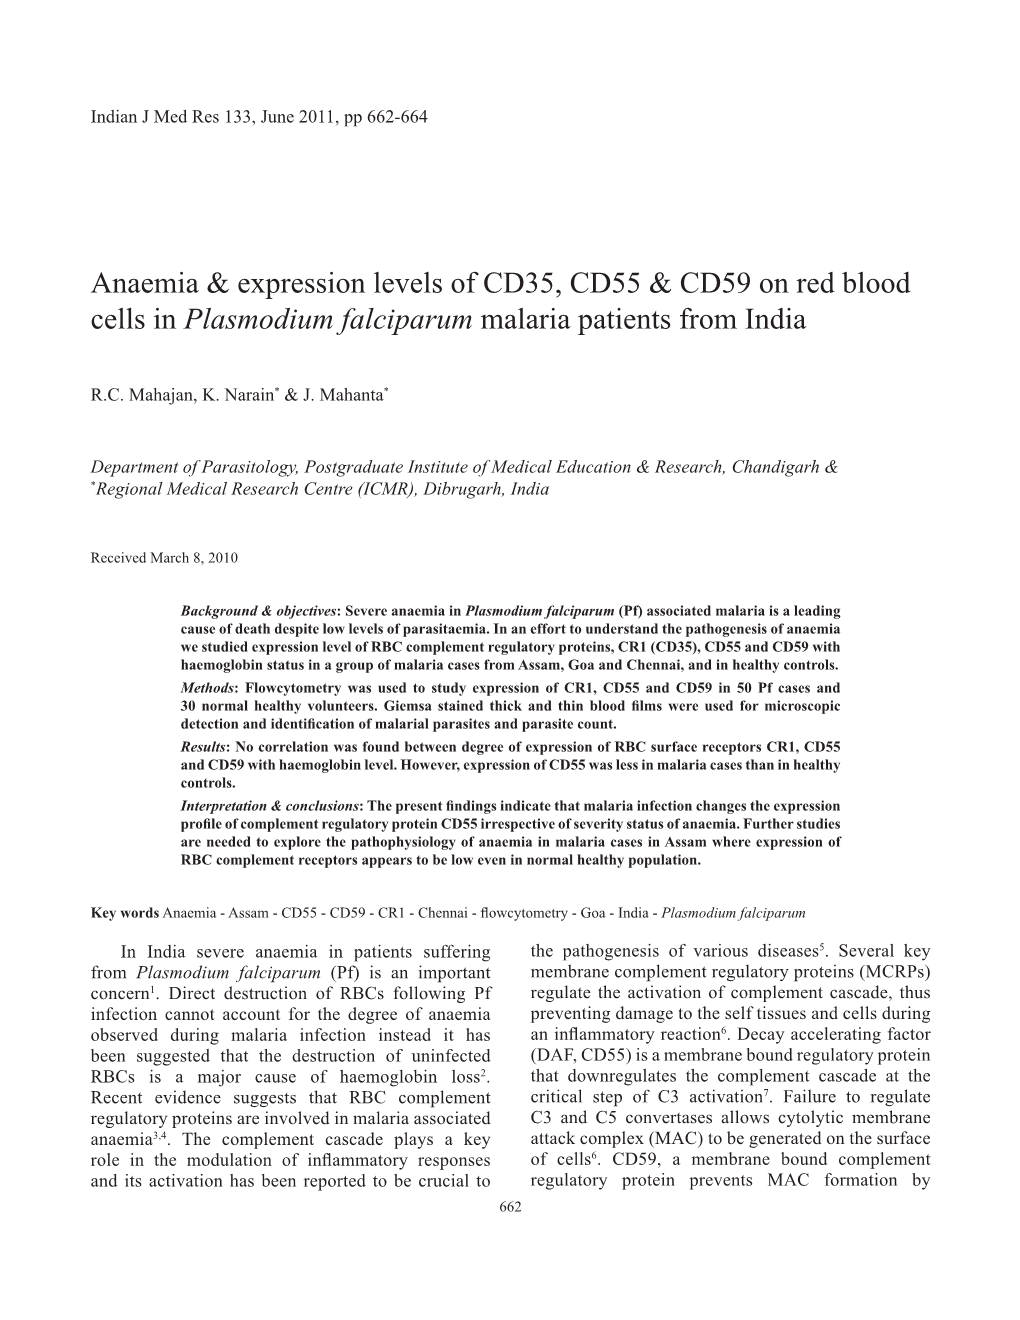 Anaemia & Expression Levels of CD35, CD55 & CD59 on Red Blood Cells in Plasmodium Falciparum Malaria Patients from India